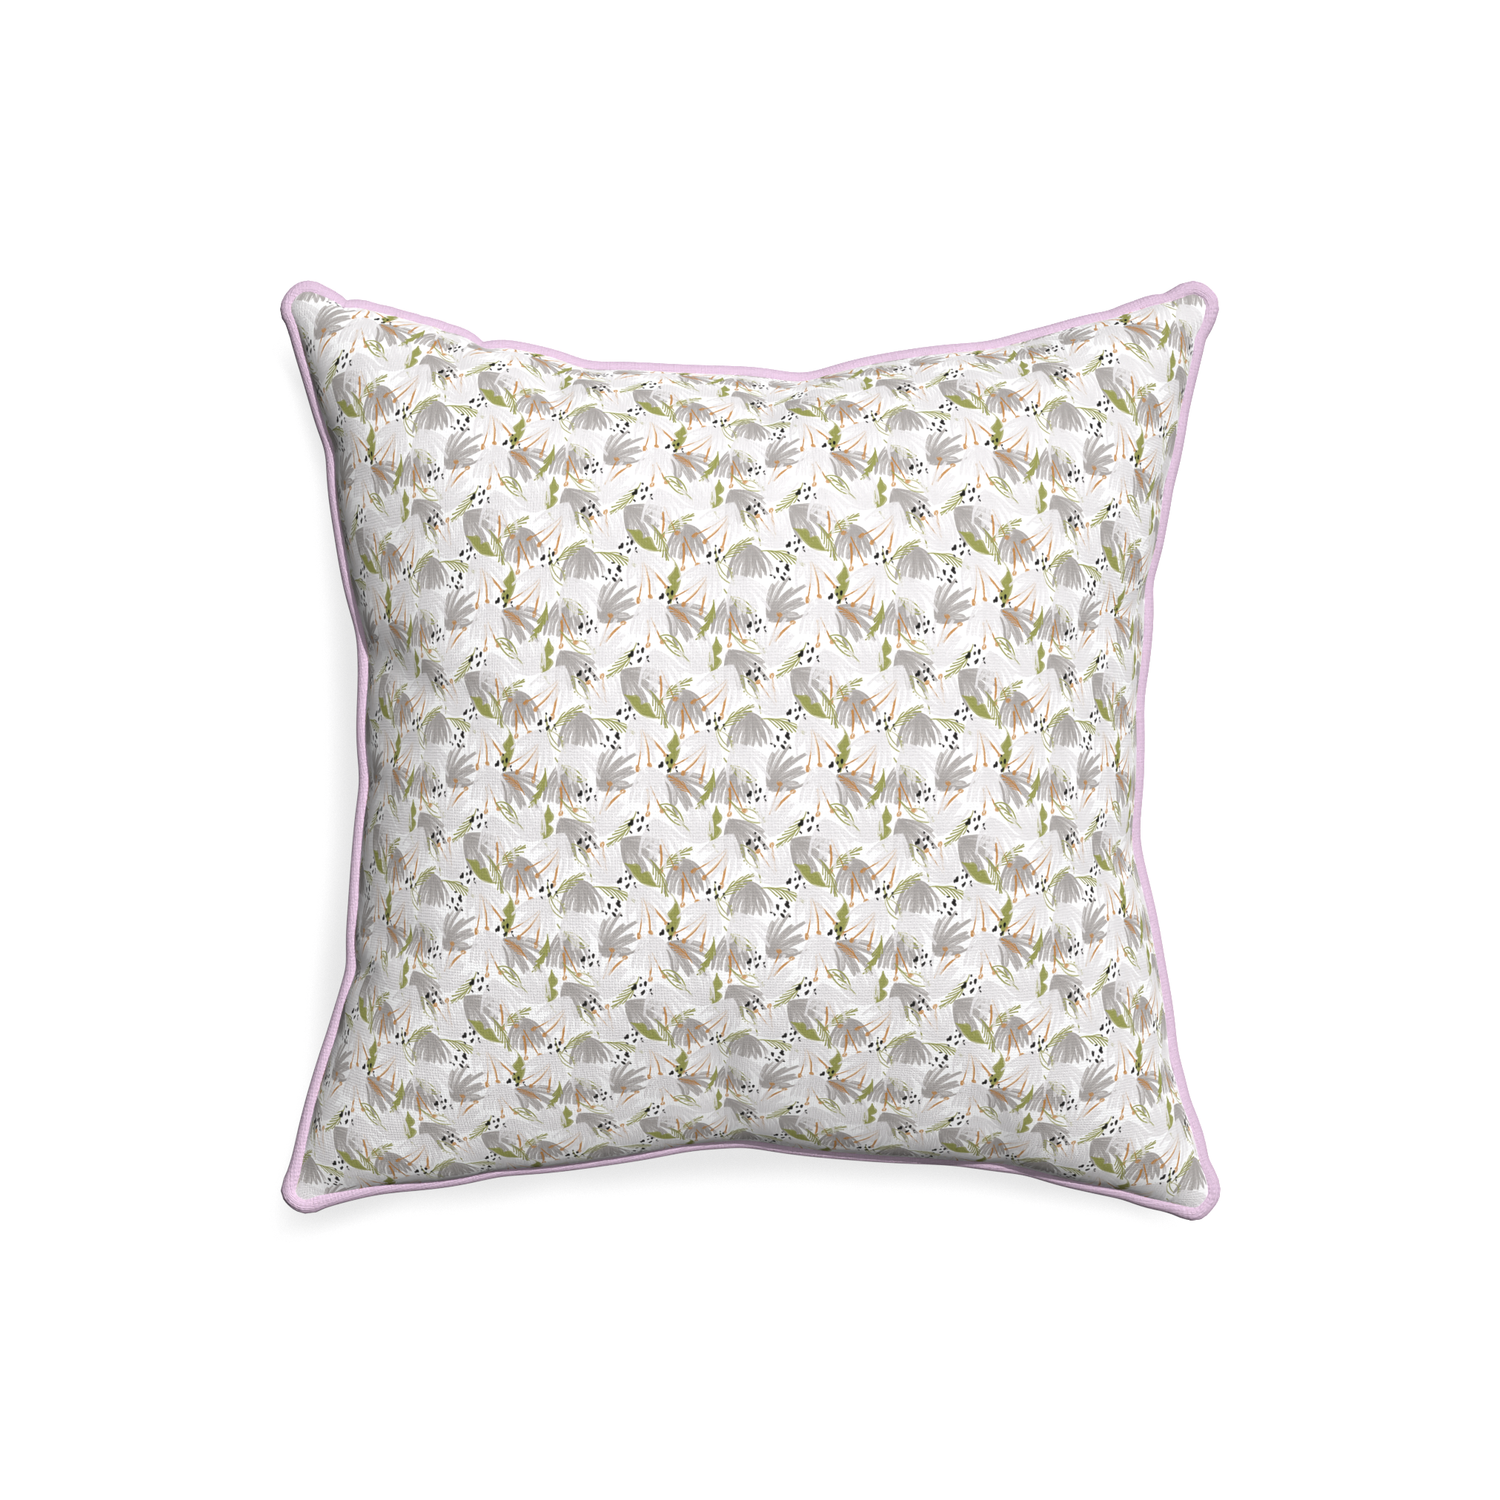 20-square eden grey custom grey floralpillow with l piping on white background